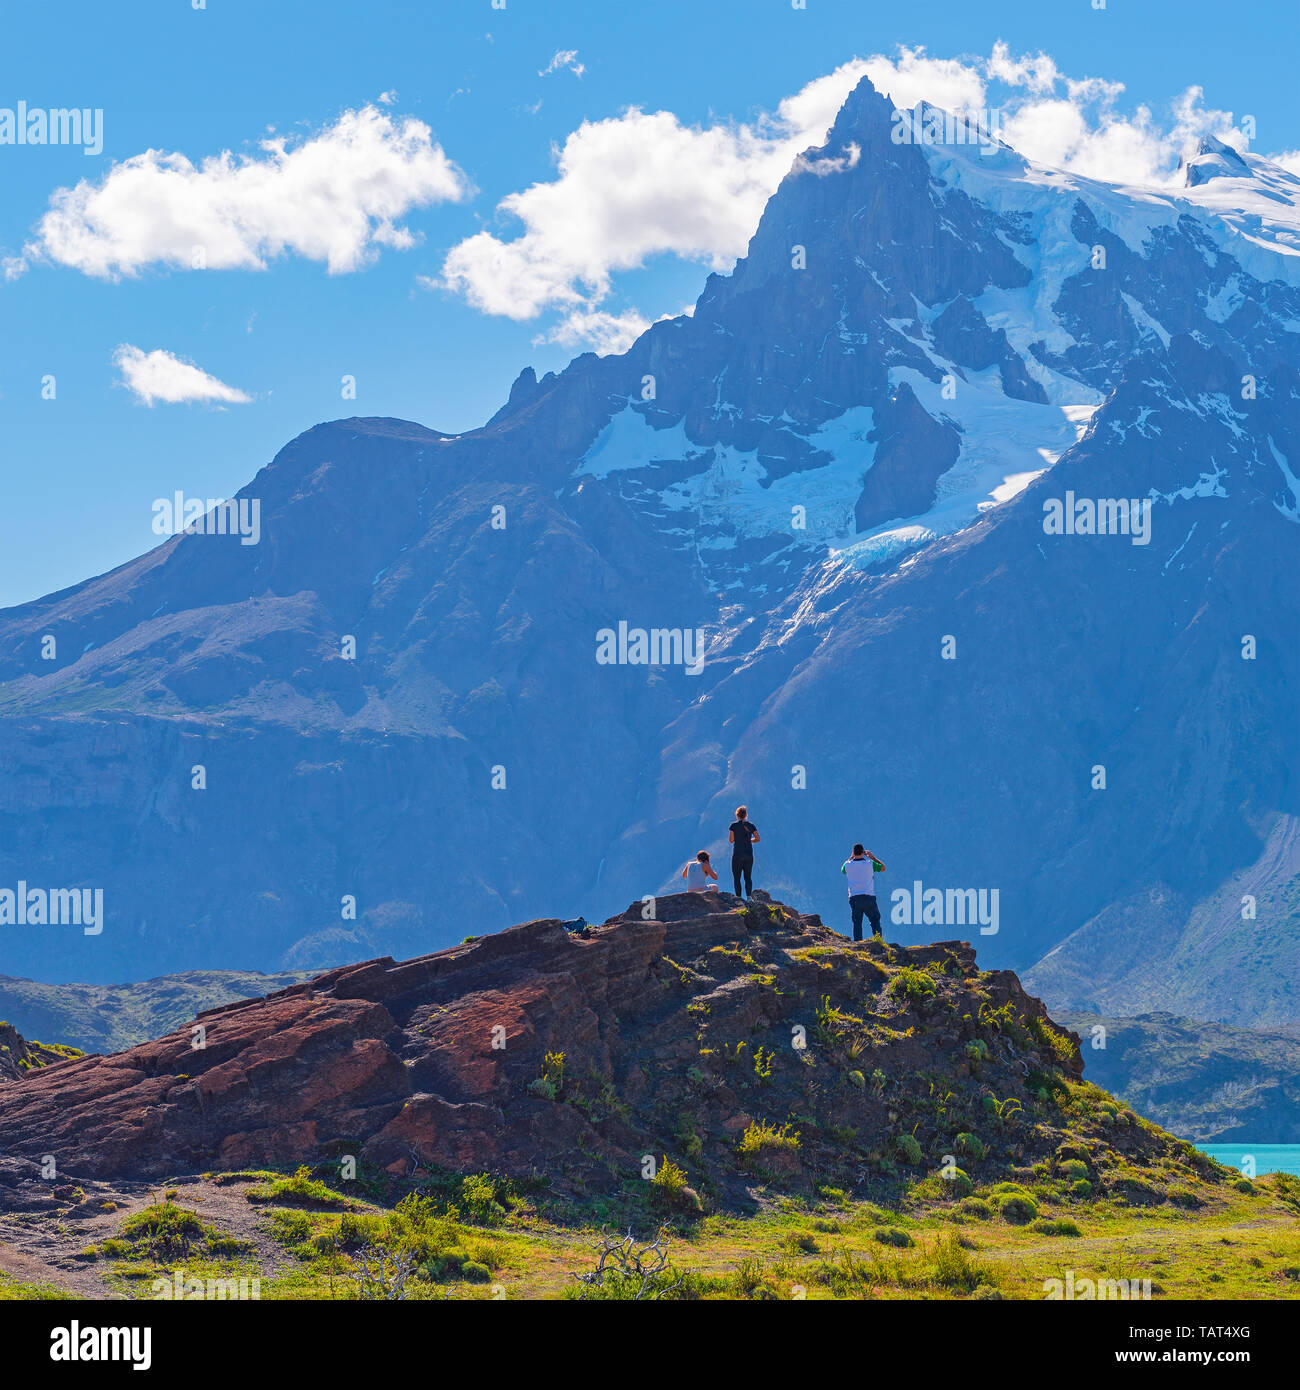 Square photograph of young tourists looking upon Pehoe Lake and the Andes peaks of Torres del Paine national park, Patagonia, Chile. Stock Photo